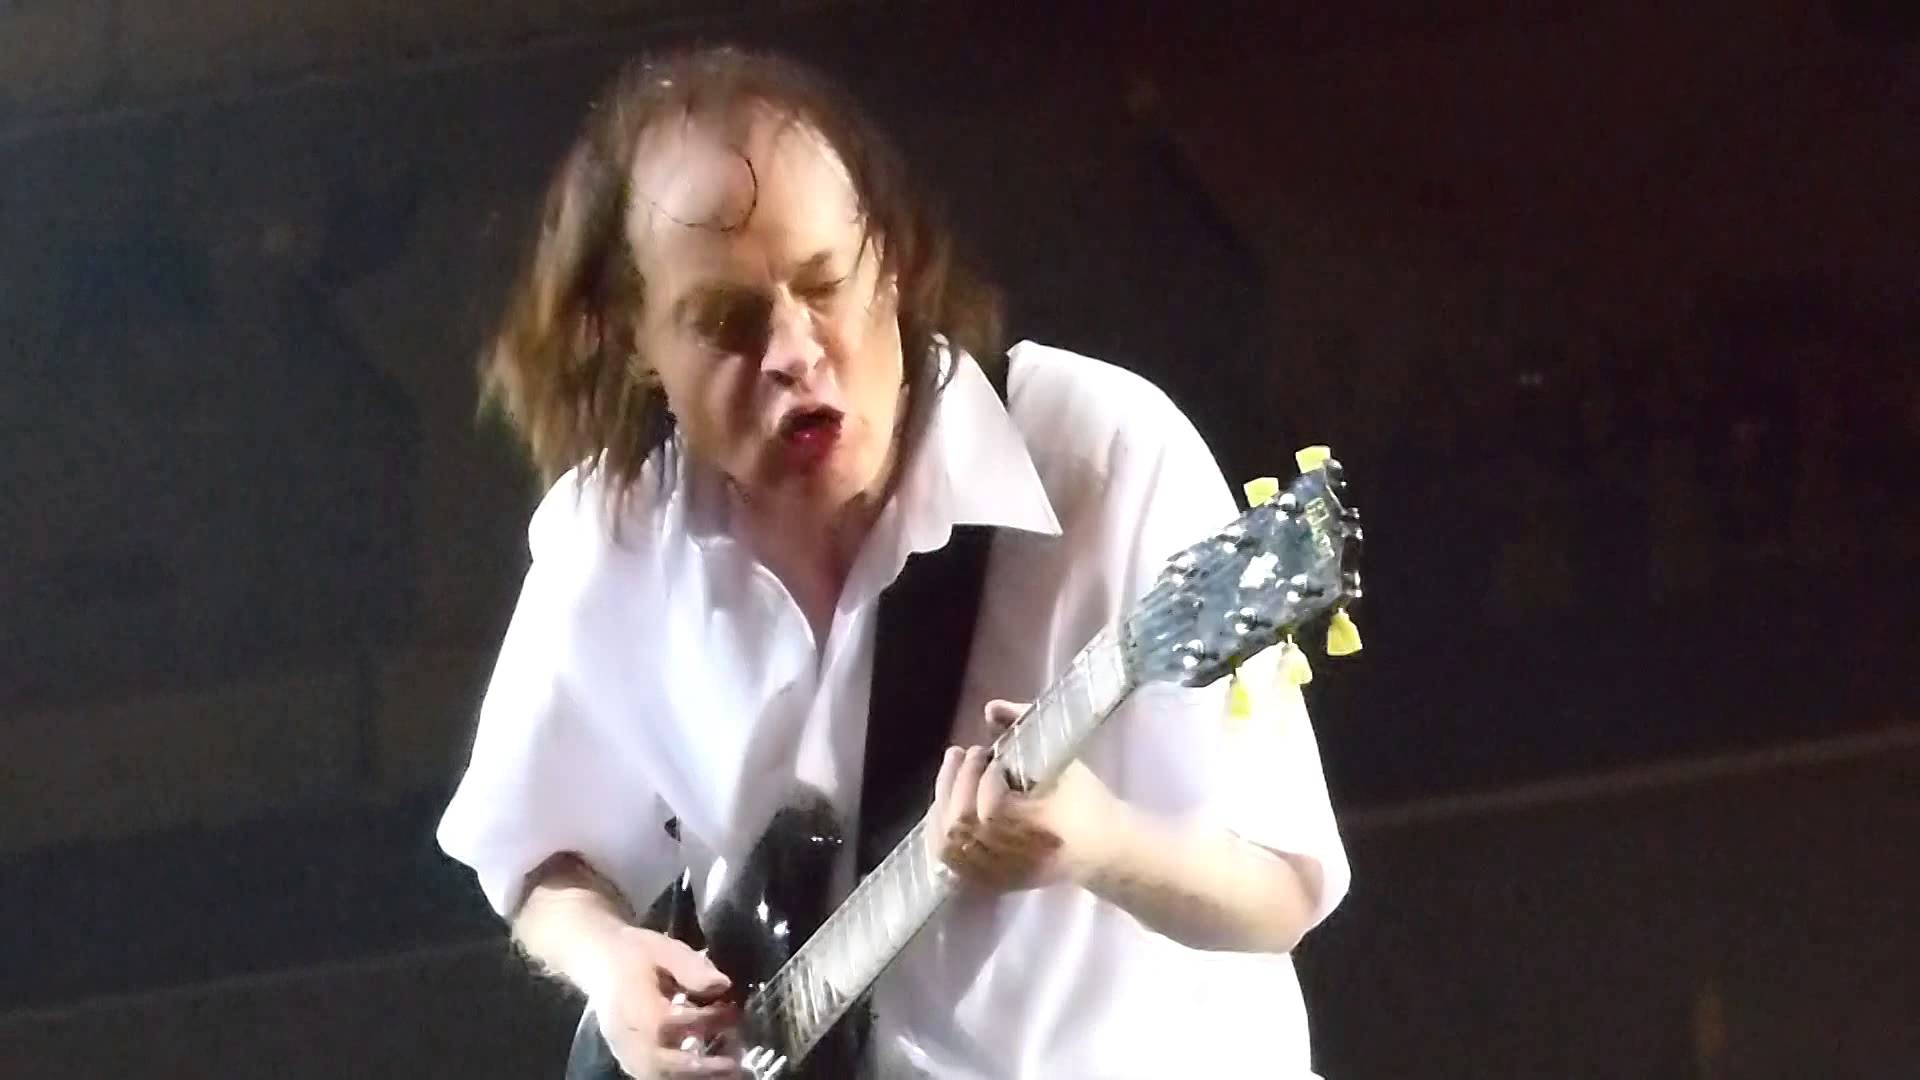 AC / DC, Chicago, 2 / 17 / 16, Angus Young guitar solo, part 1